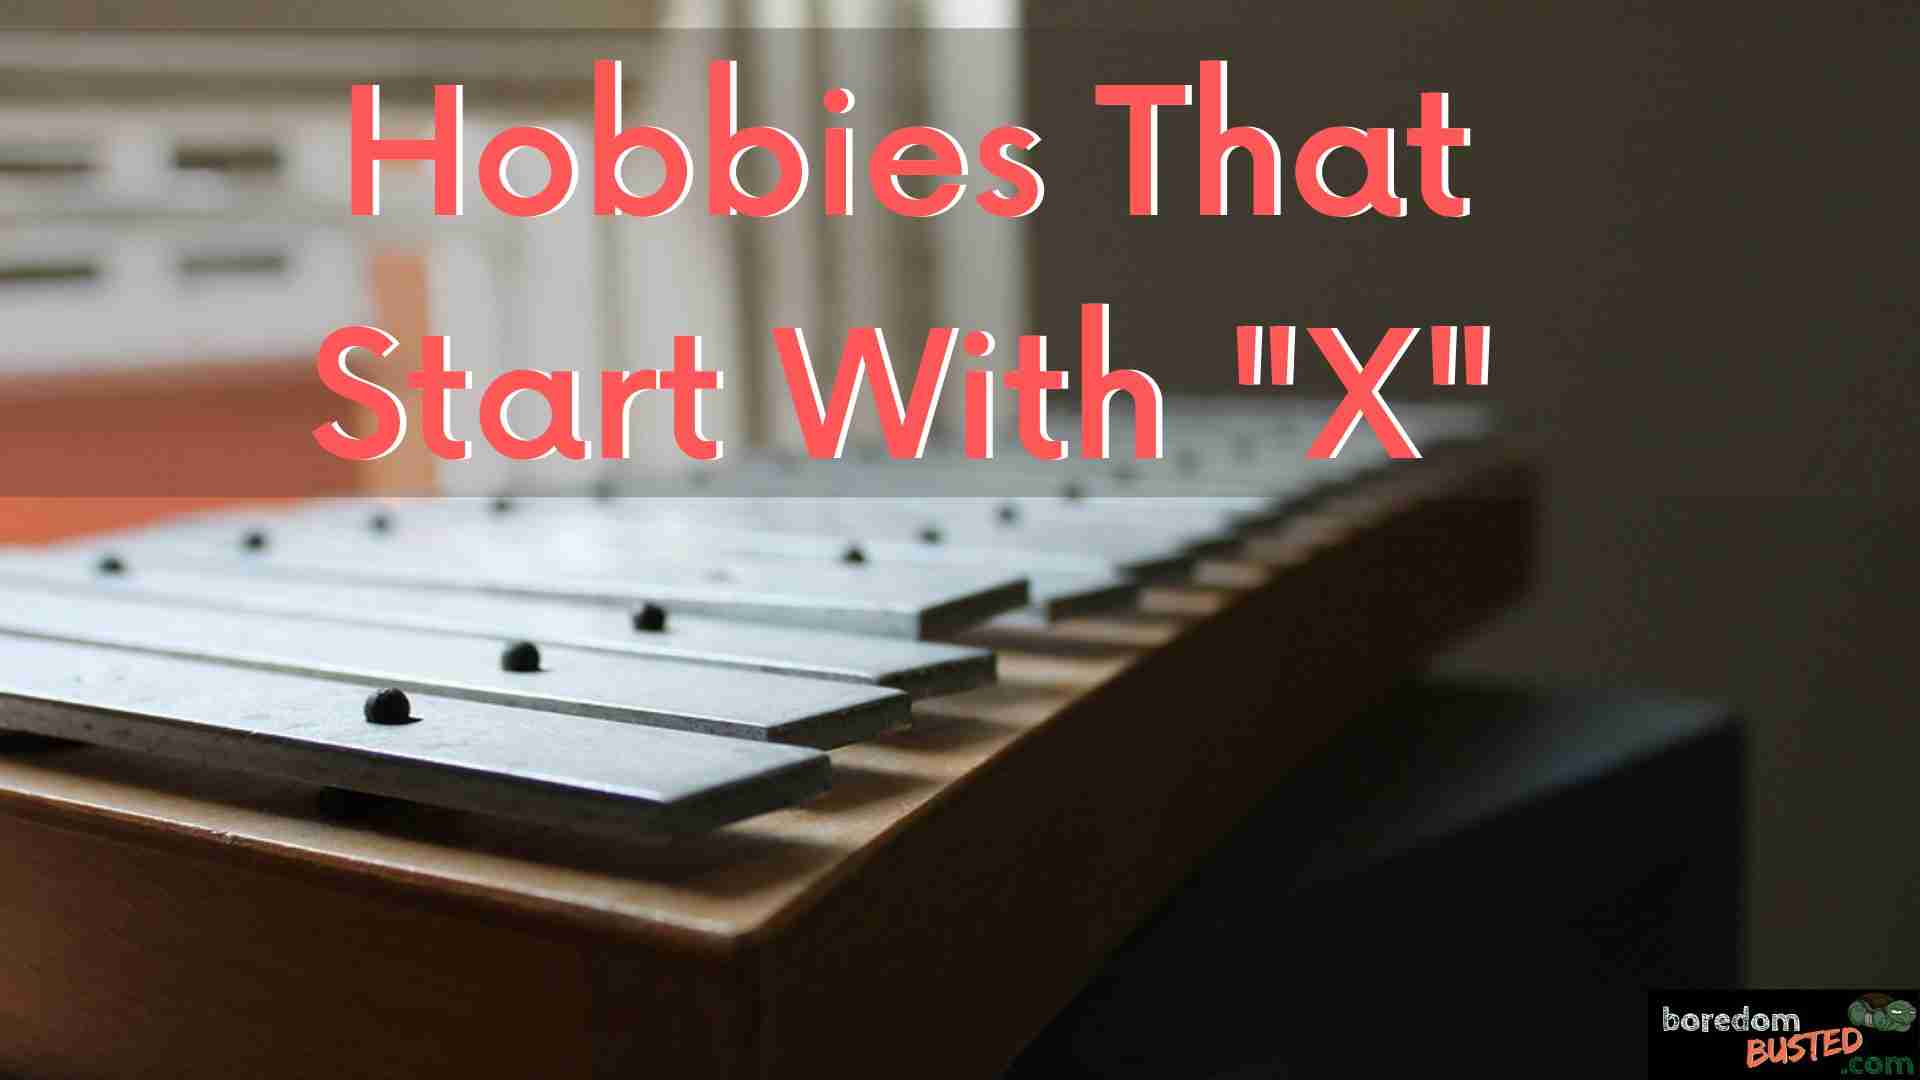 Hobbies that Start with X